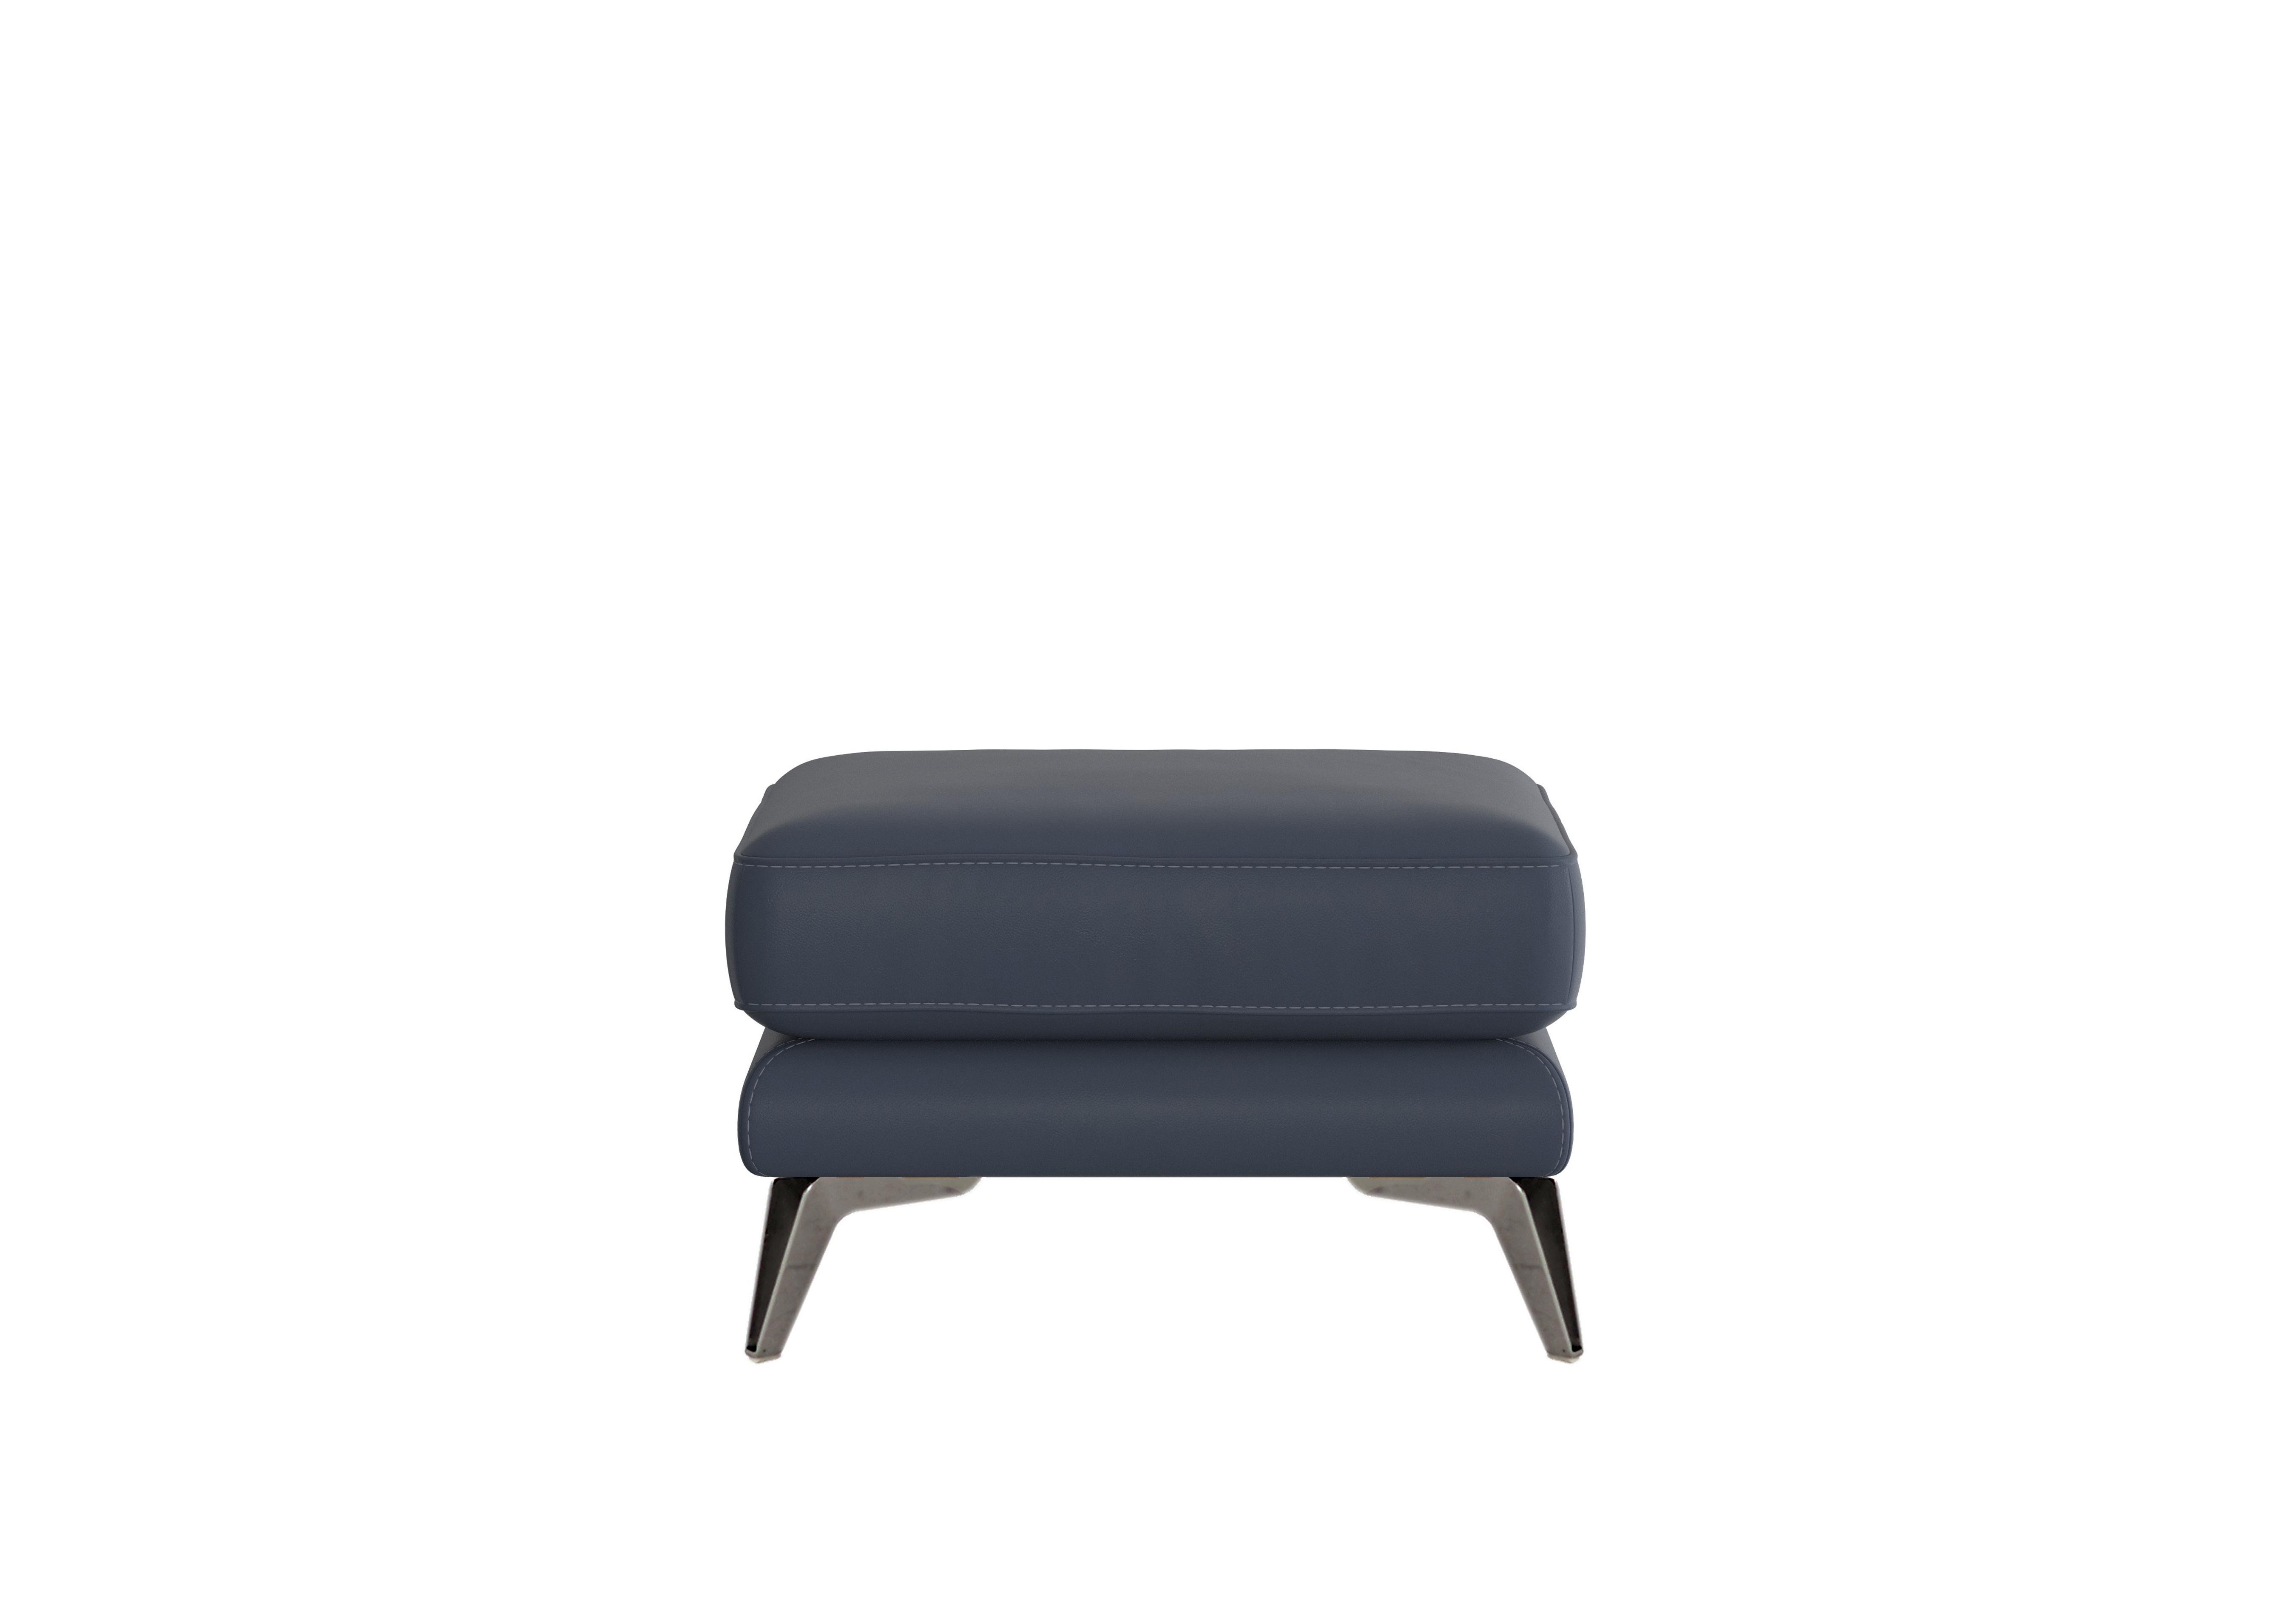 Contempo Leather Footstool in Bv-313e Ocean Blue on Furniture Village